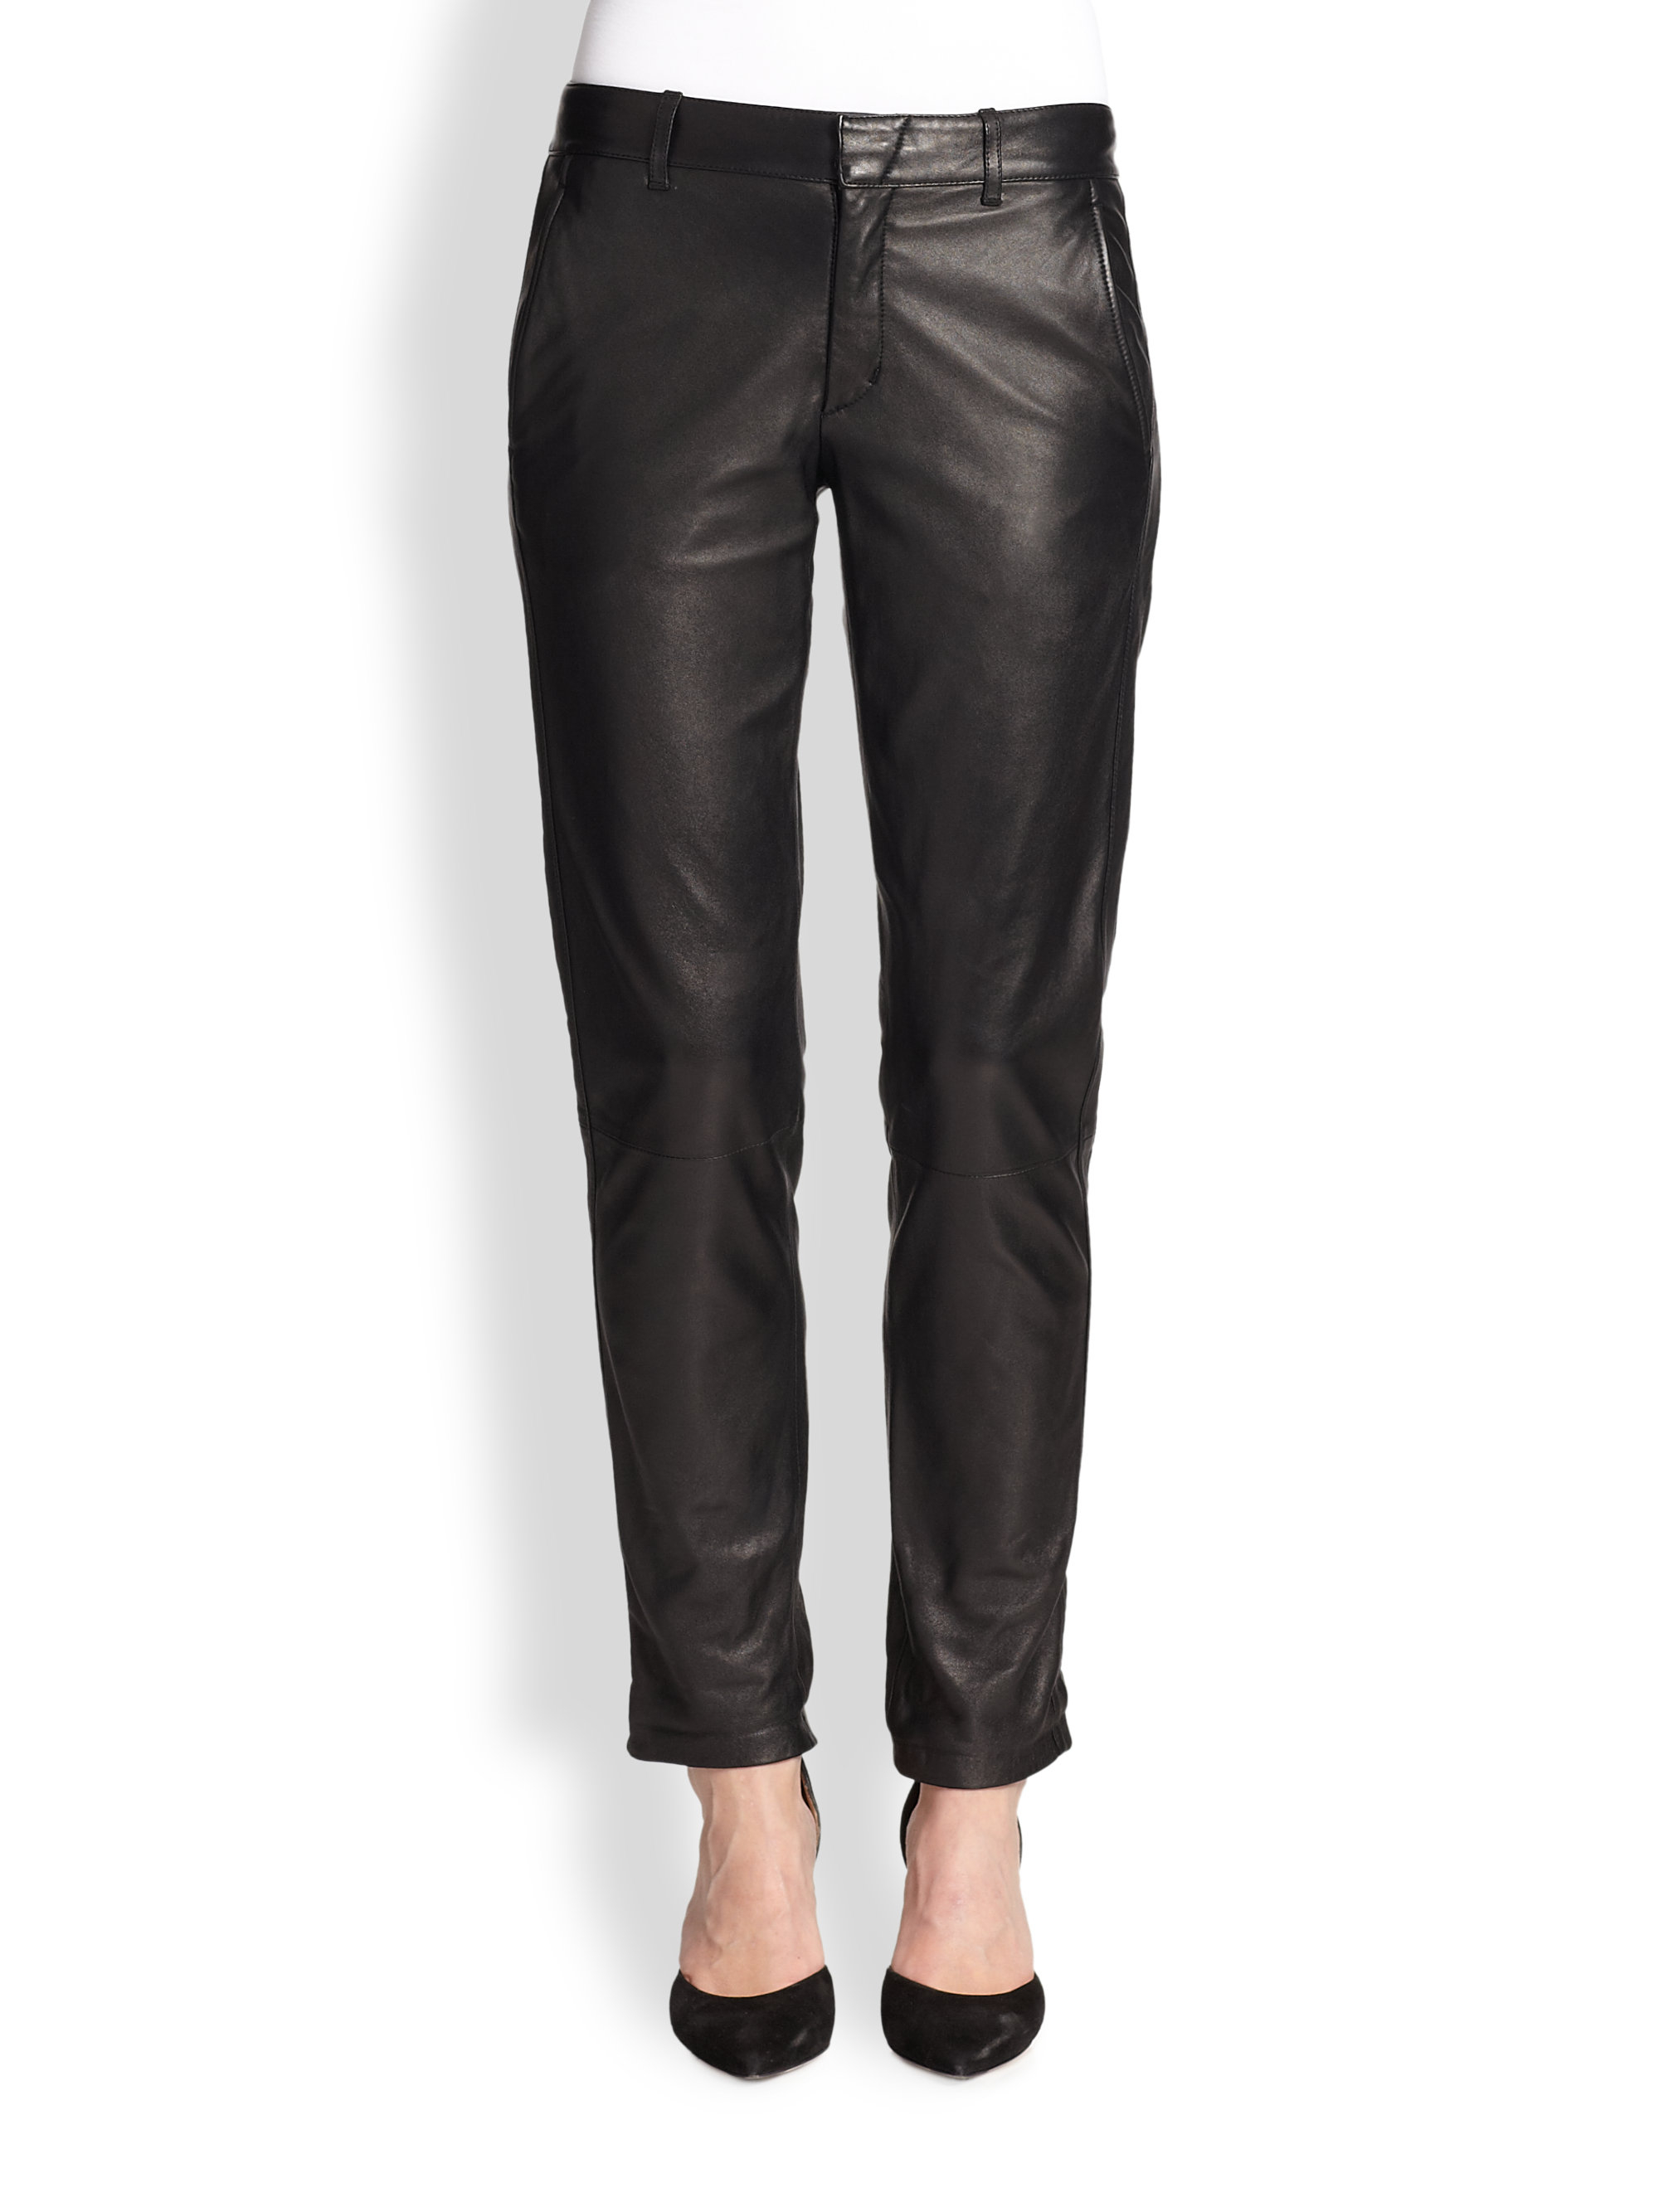 Vince Leather Straight-Leg Pants in Black - Lyst